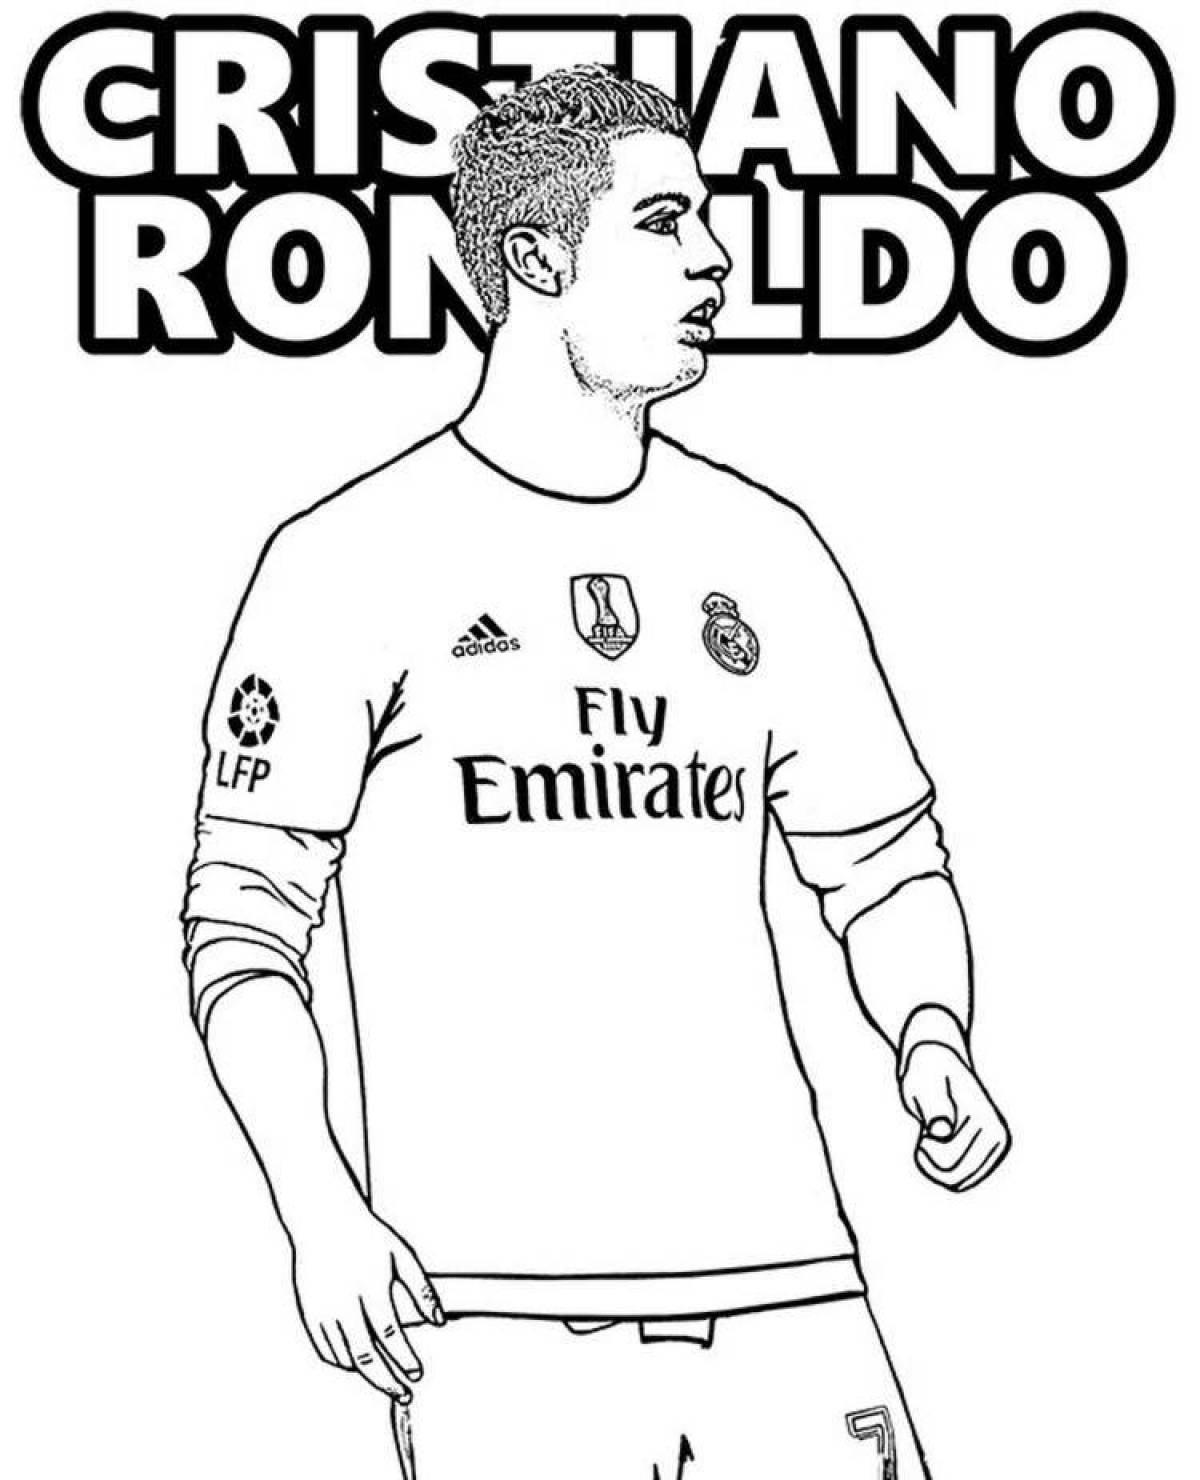 Pele's dazzling soccer player coloring page